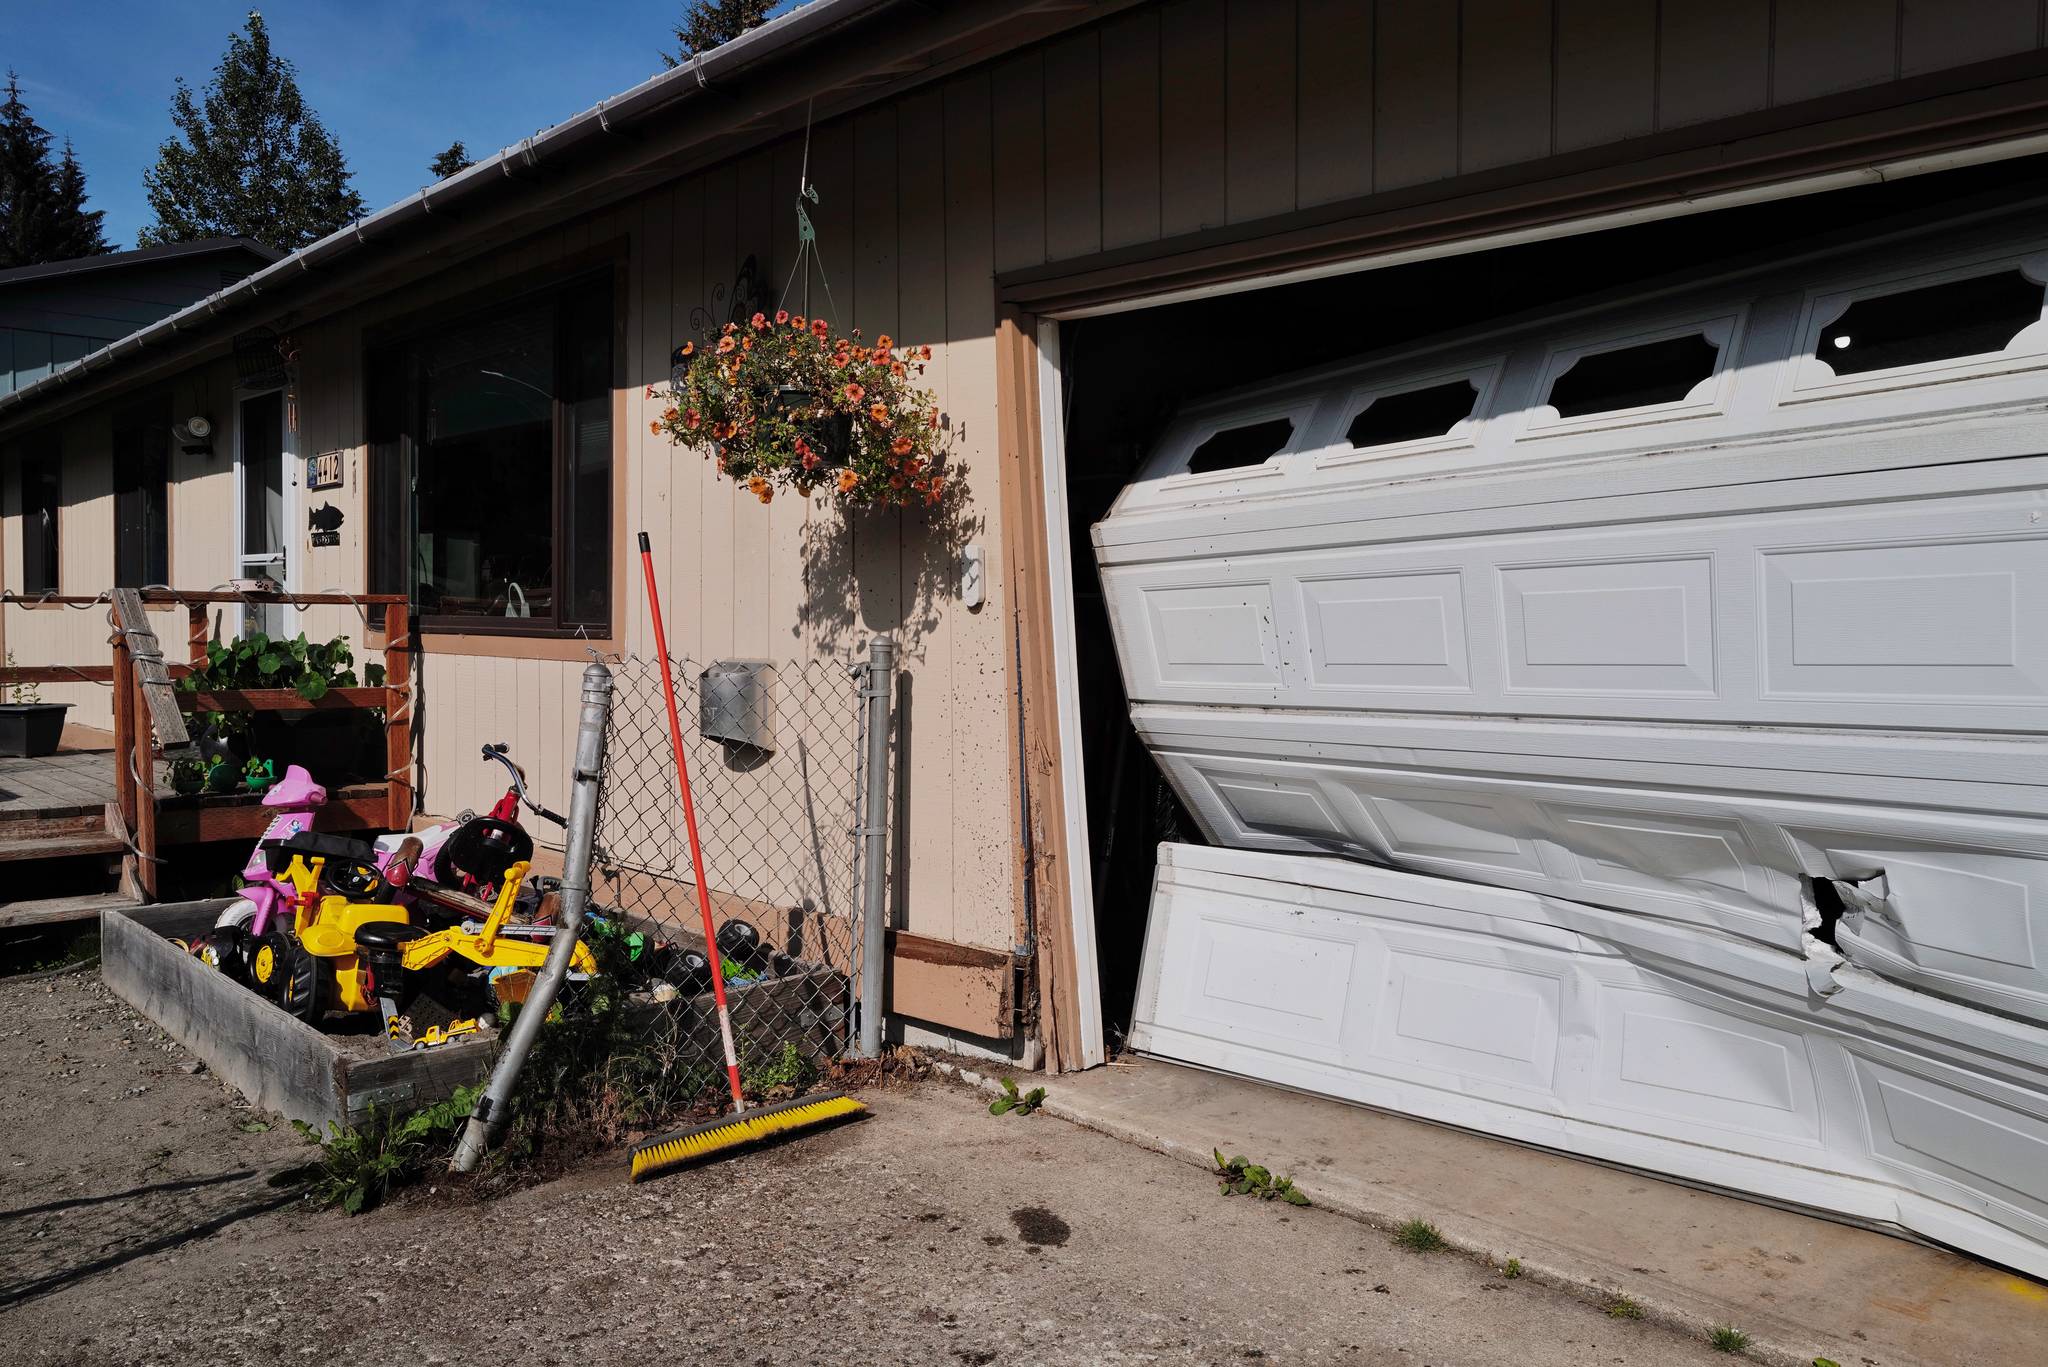 Police say a drunken drive hit this house in the 4400 block of Mendenhall Boulevard on Tuesday, July 30, 2019. Along with a fence and house, two vehicles were also damaged. The Driver did not have insurance, according to the house owner Amy Roemer. (Michael Penn | Juneau Empire)